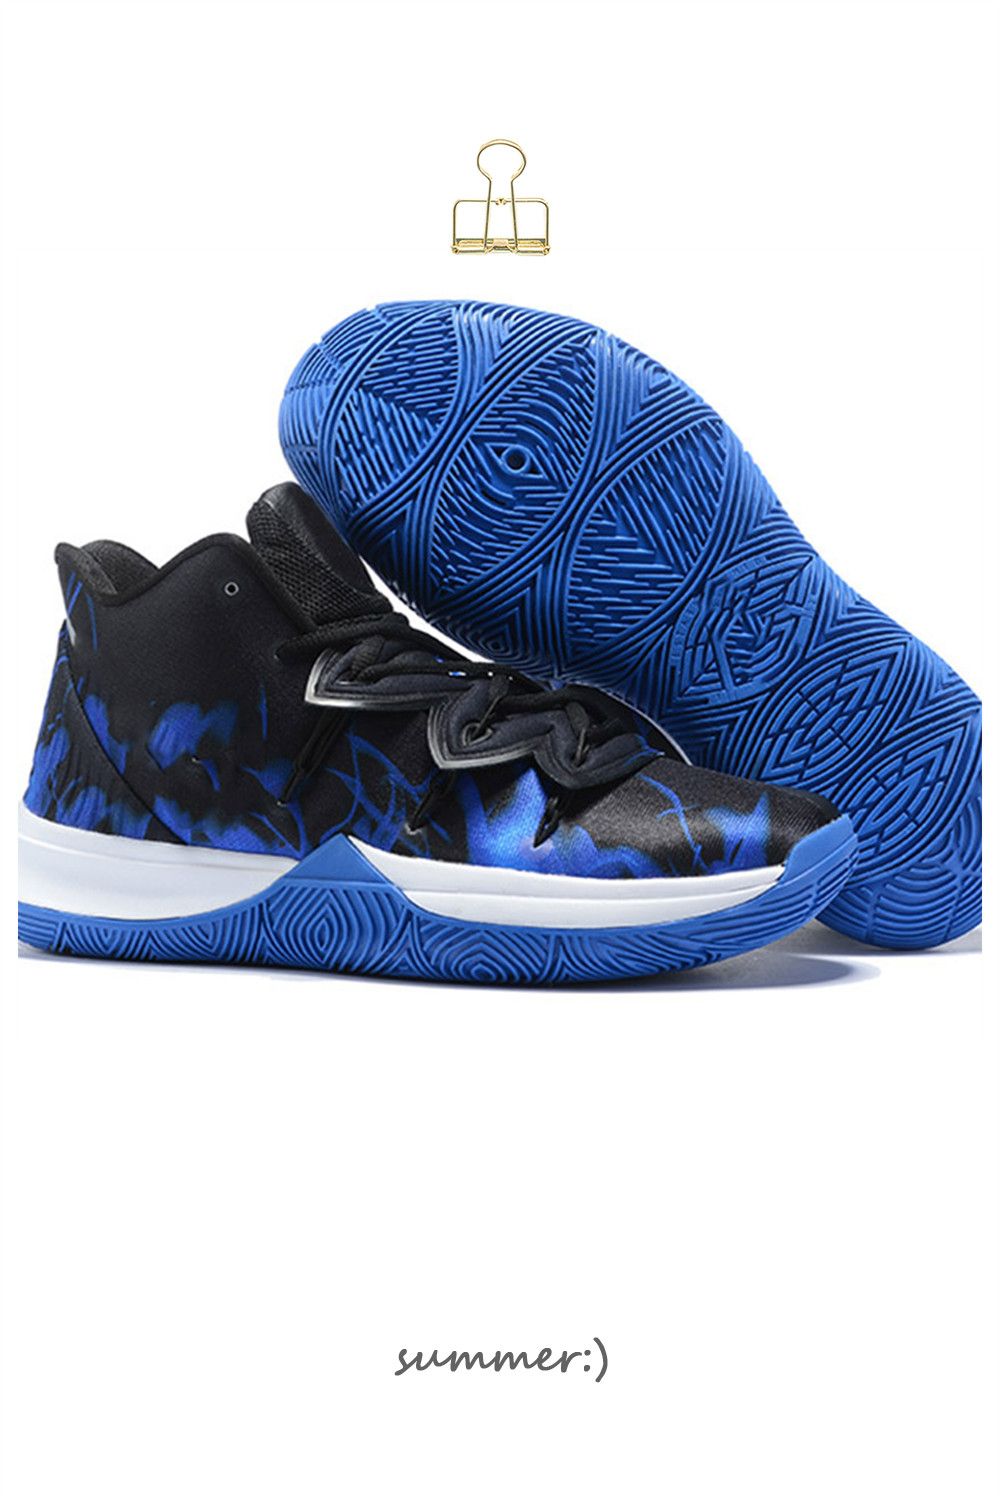 kyrie irving 5 azules